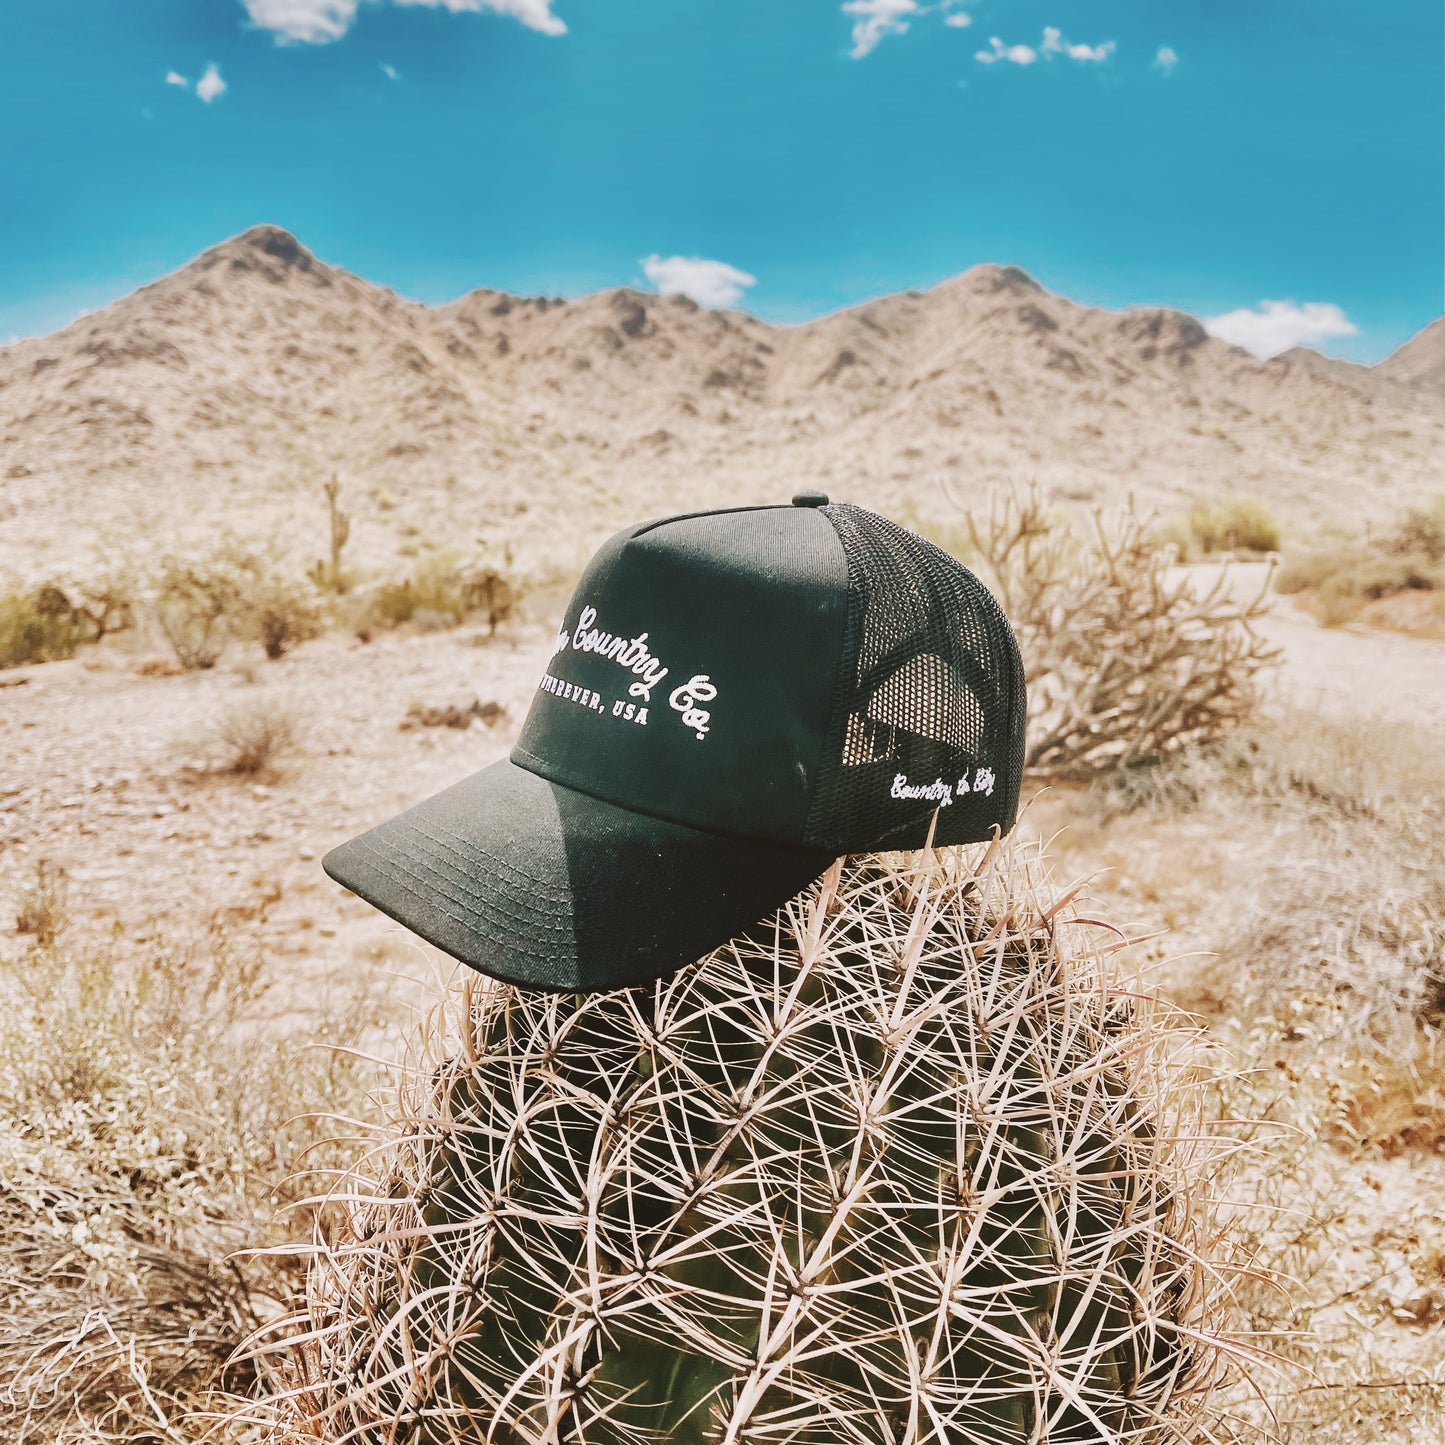 a green hat sitting on top of a cactus